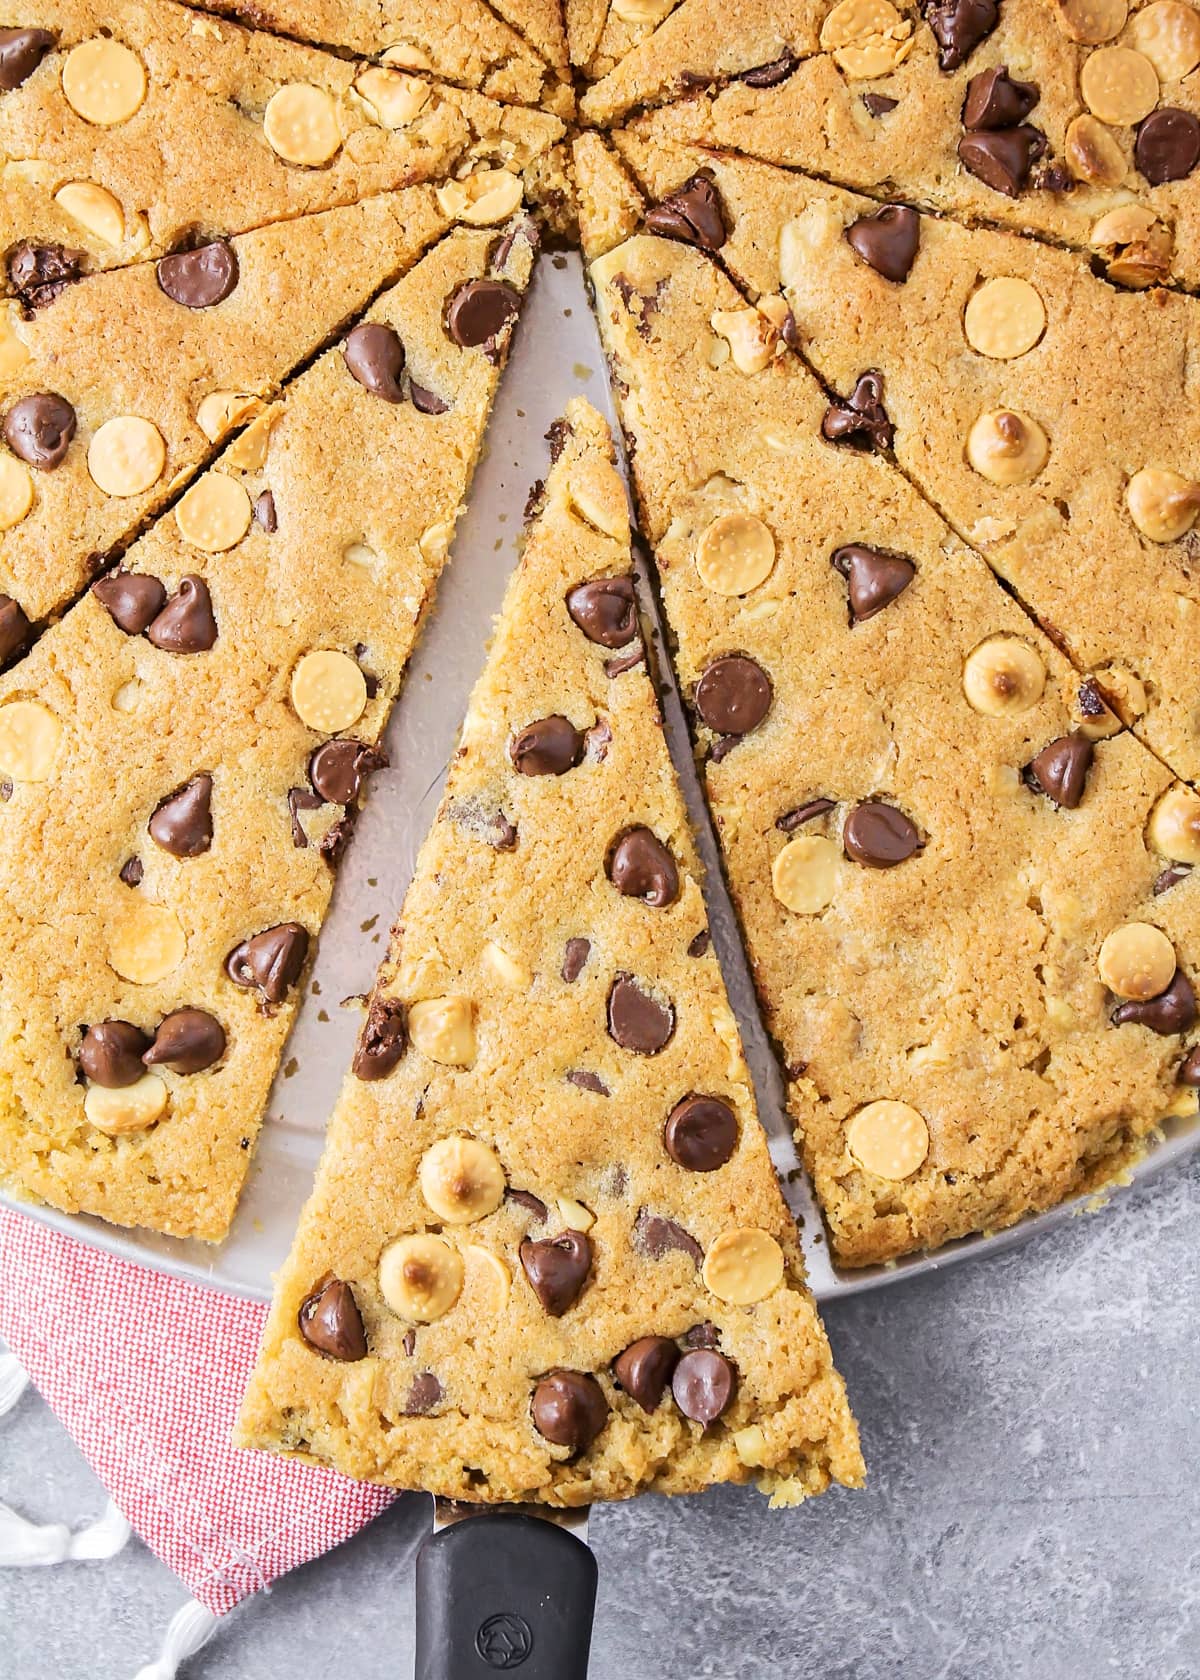 Sliced giant chocolate chip cookie.